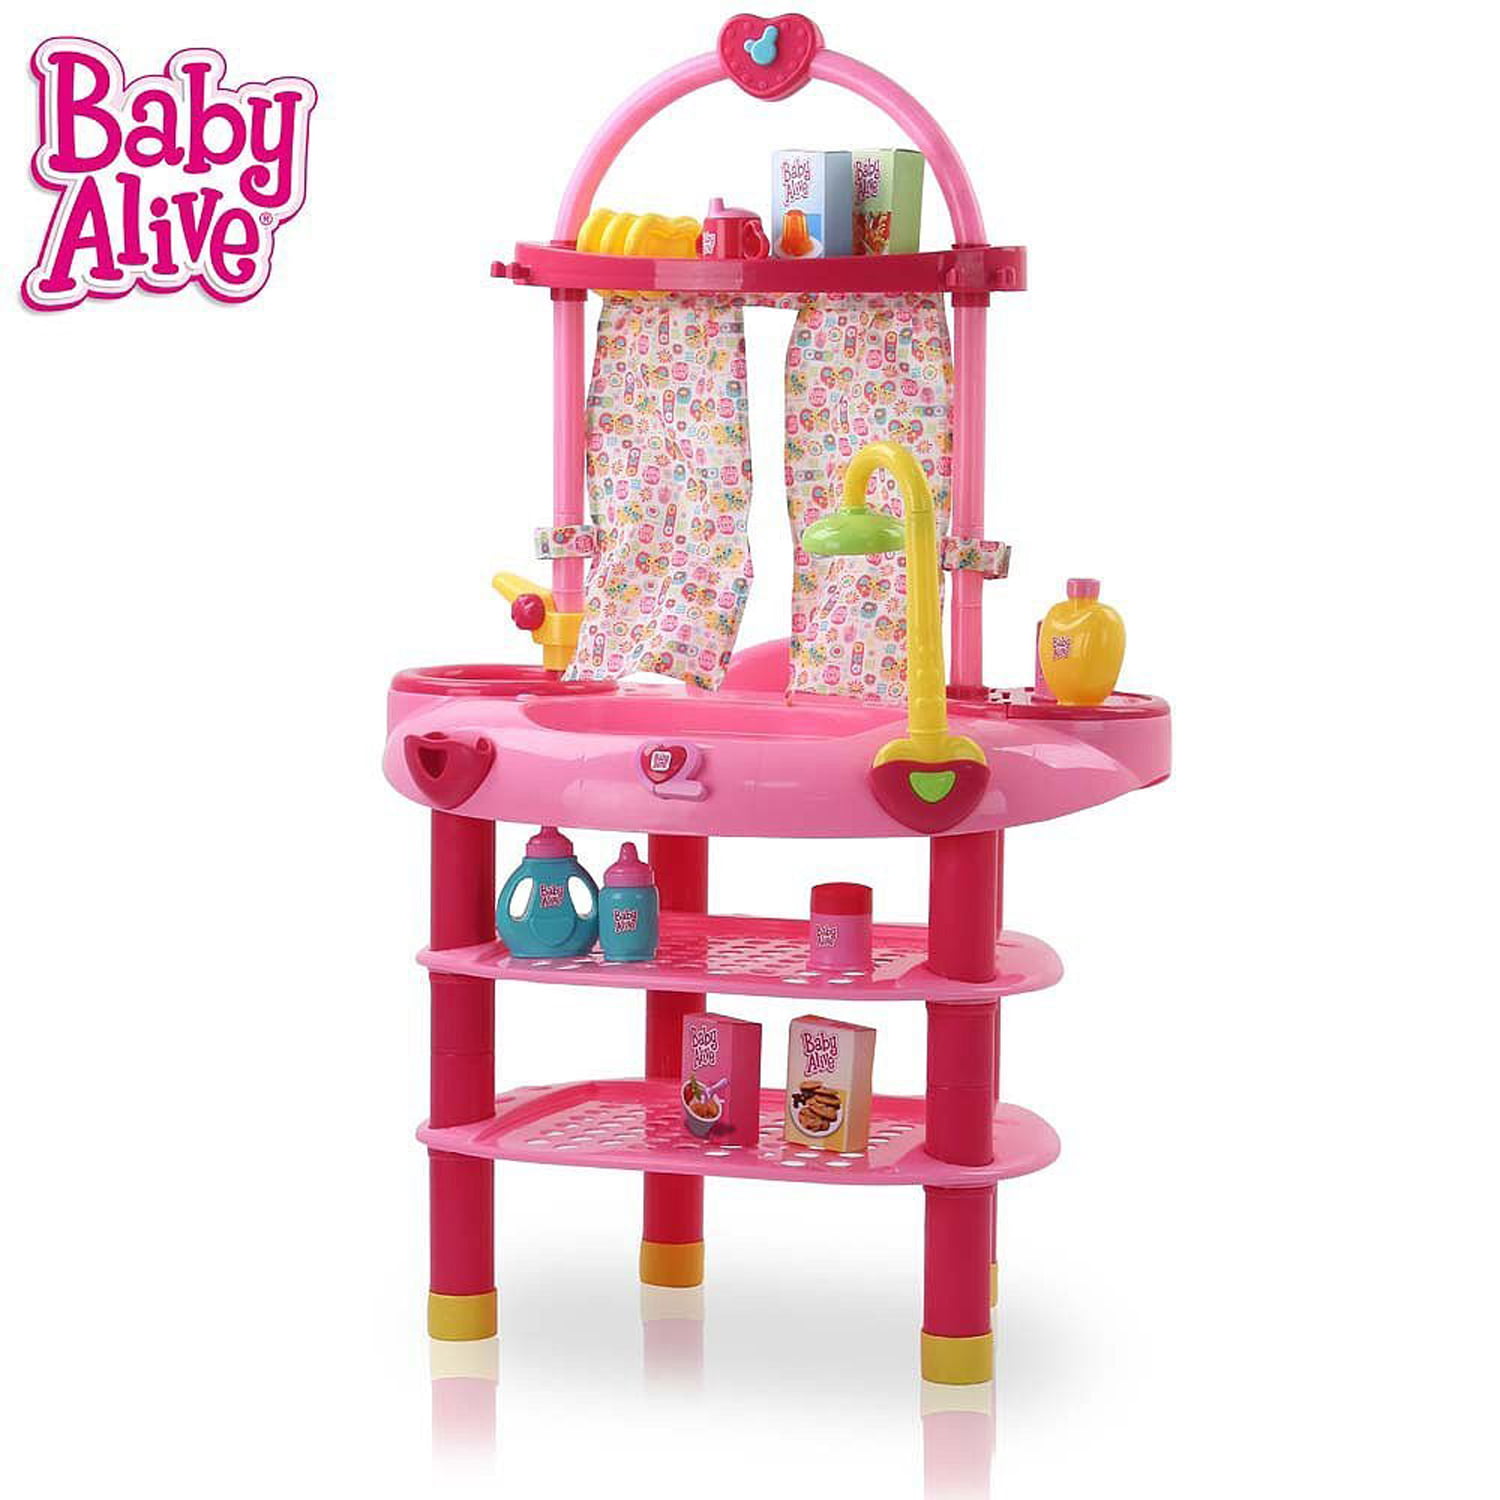 Baby Alive Doll 3 in 1 Cook ?n Care 